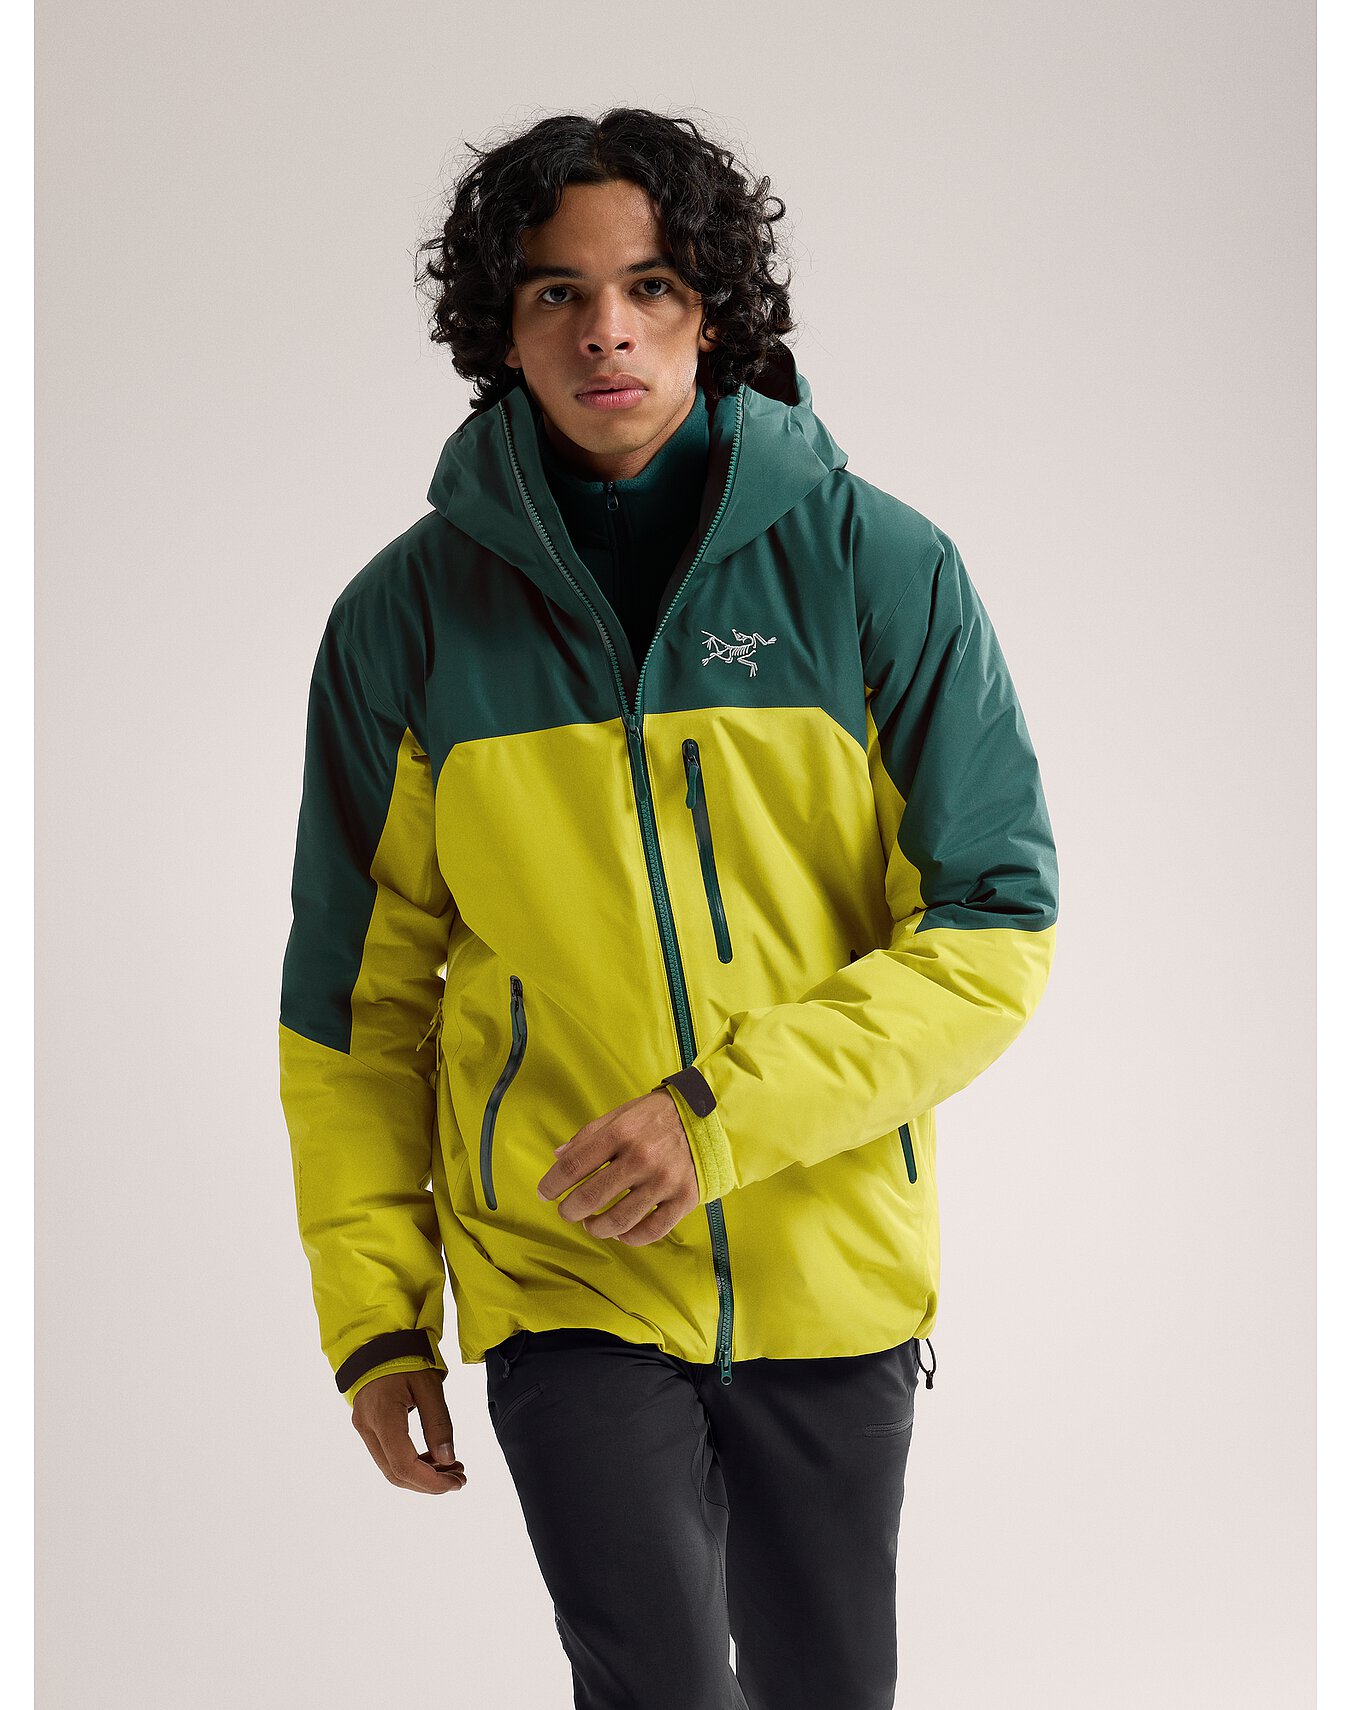 Beta Insulated Jacket Men's | Arc'teryx Outlet